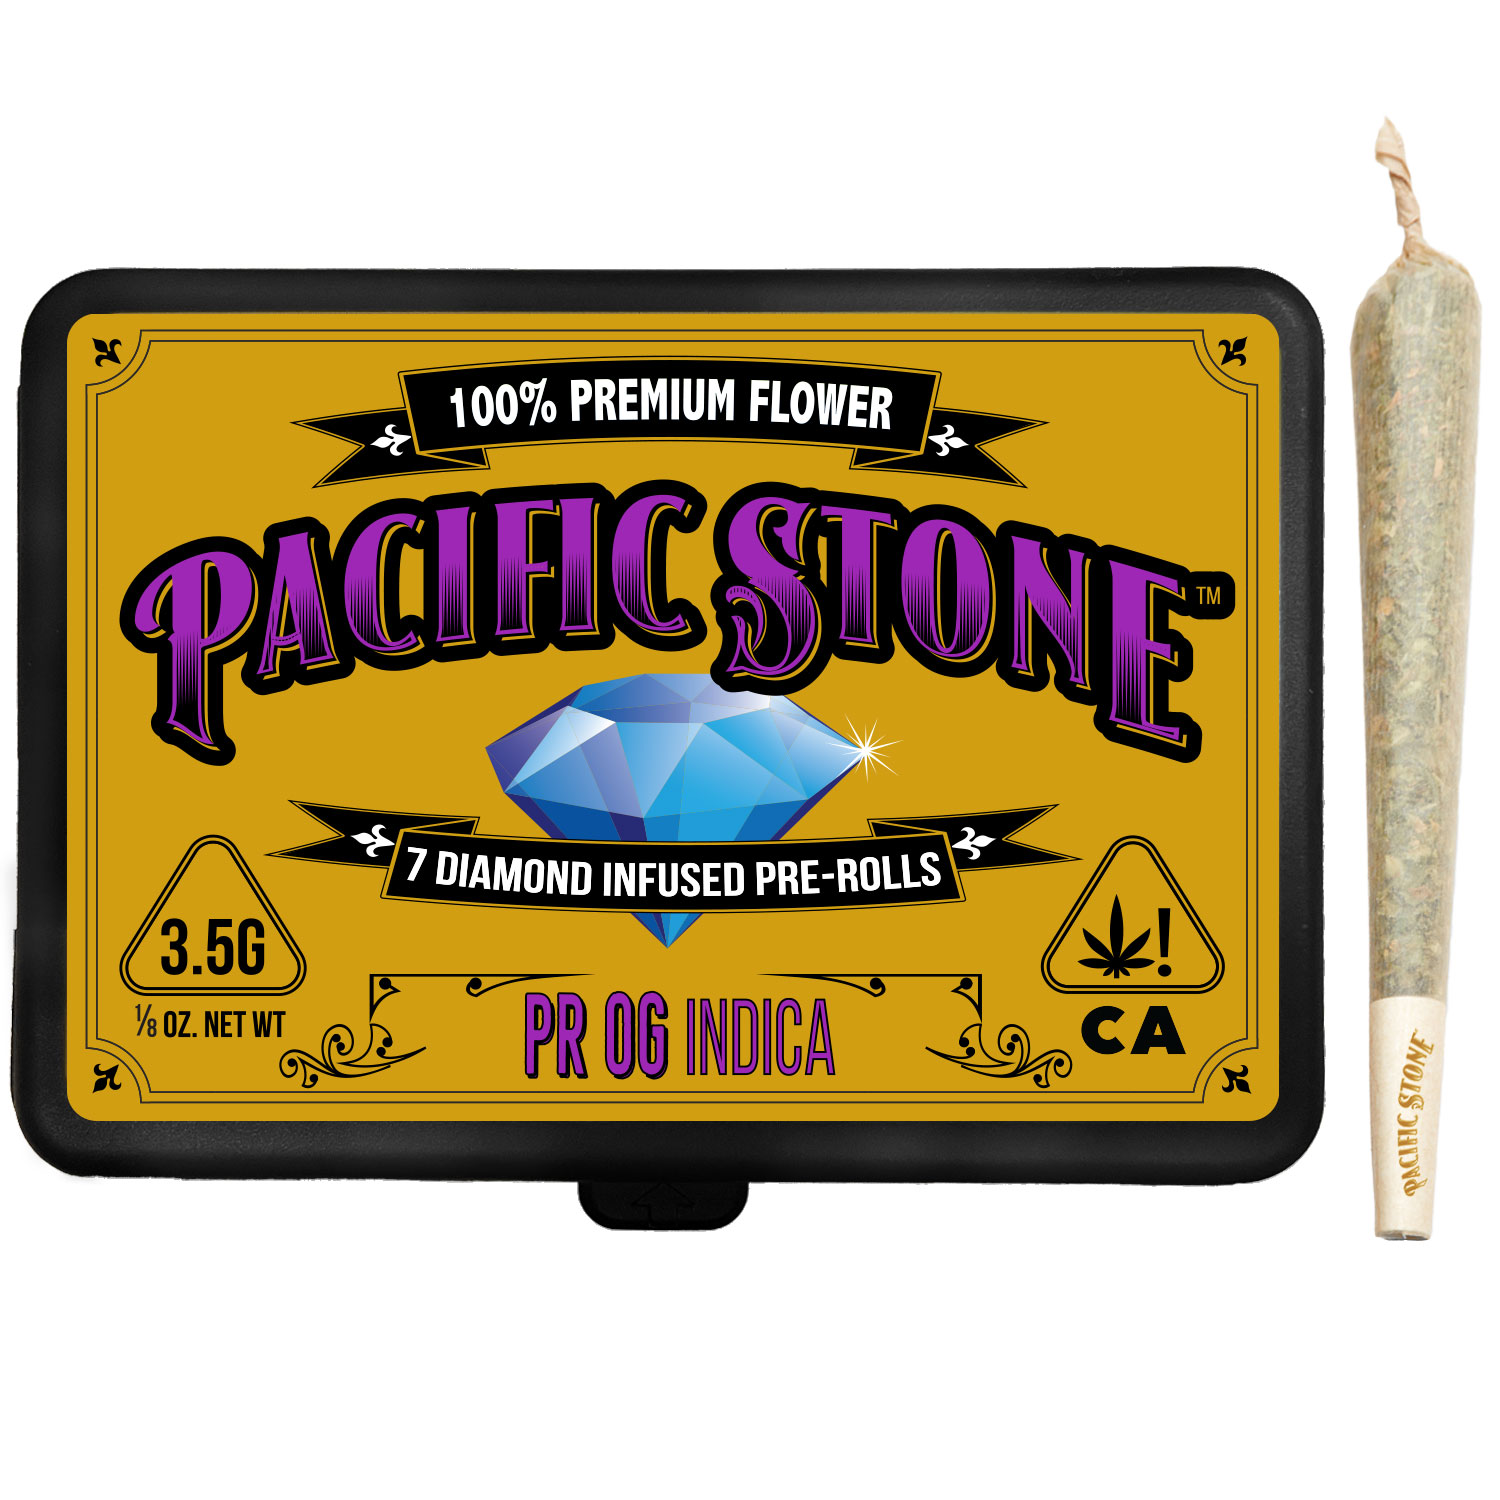 A photograph of Pacific Stone Diamond Infused Prerolls 0.5g Indica PR OG 7-Pack 3.5g